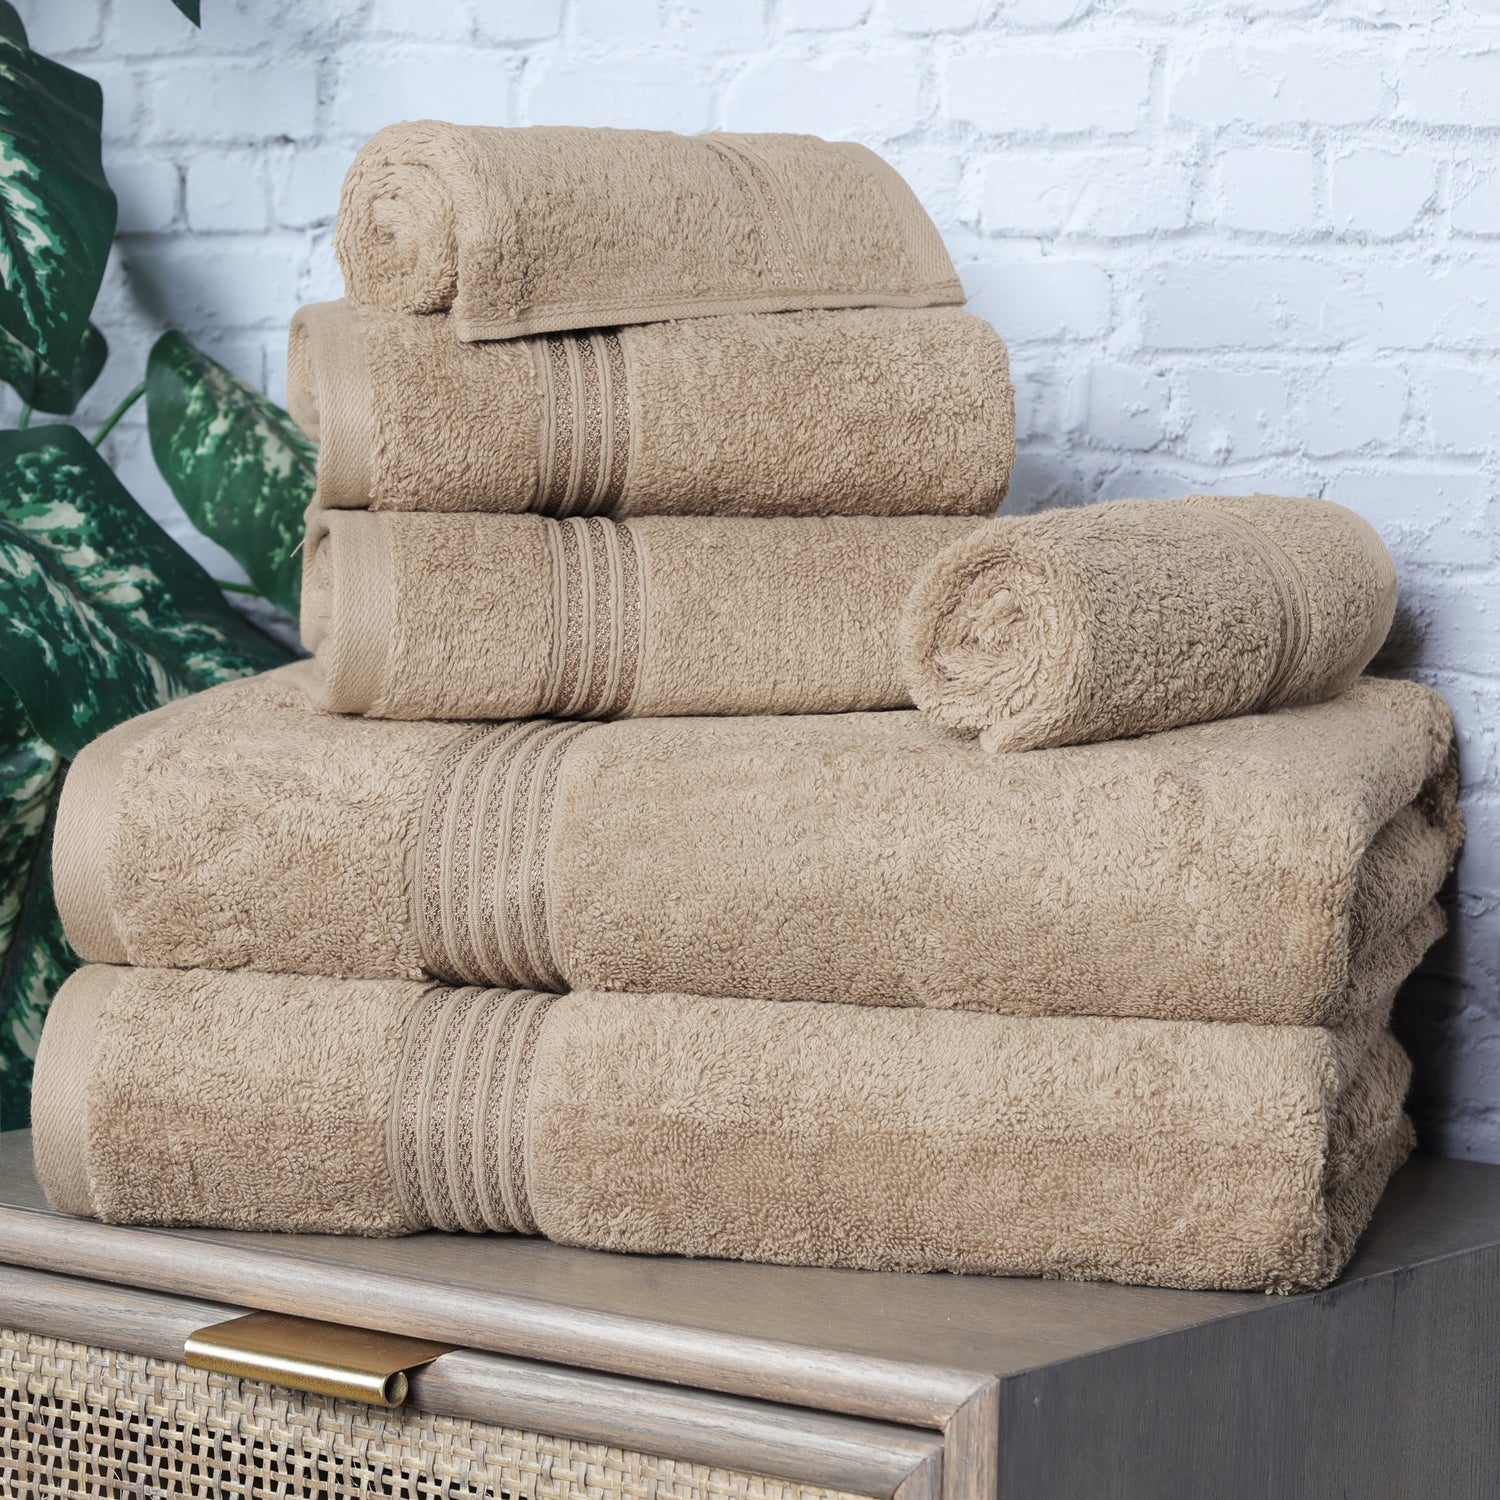 Egyptian Cotton Highly Absorbent Solid Ultra Soft Towel Set - Taupe